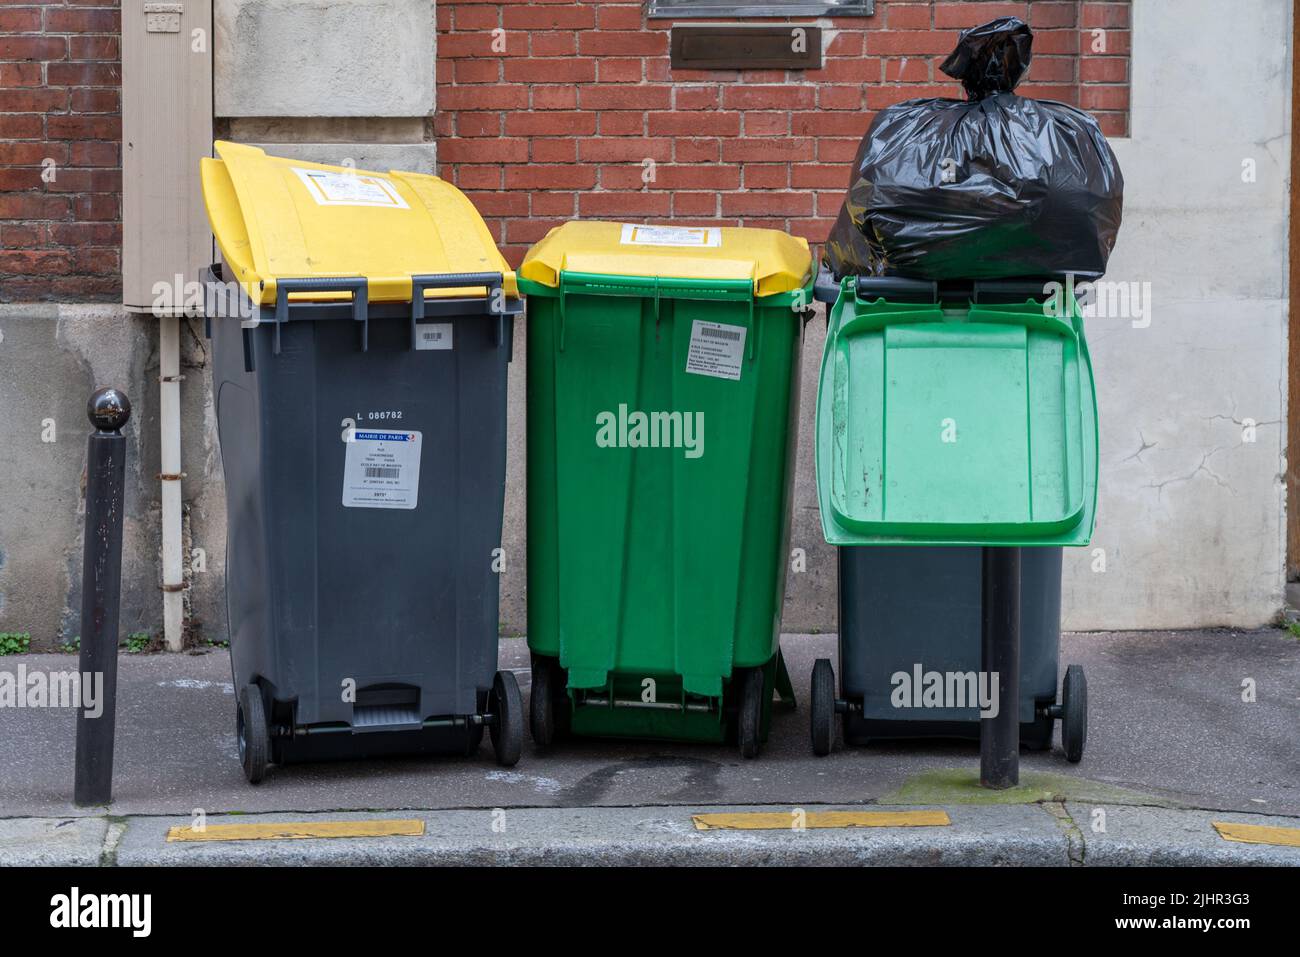 France, Ile de France region, Paris, 4th rue Chanoinesse, green and yellow dustbins (for cardboard and glass), Stock Photo